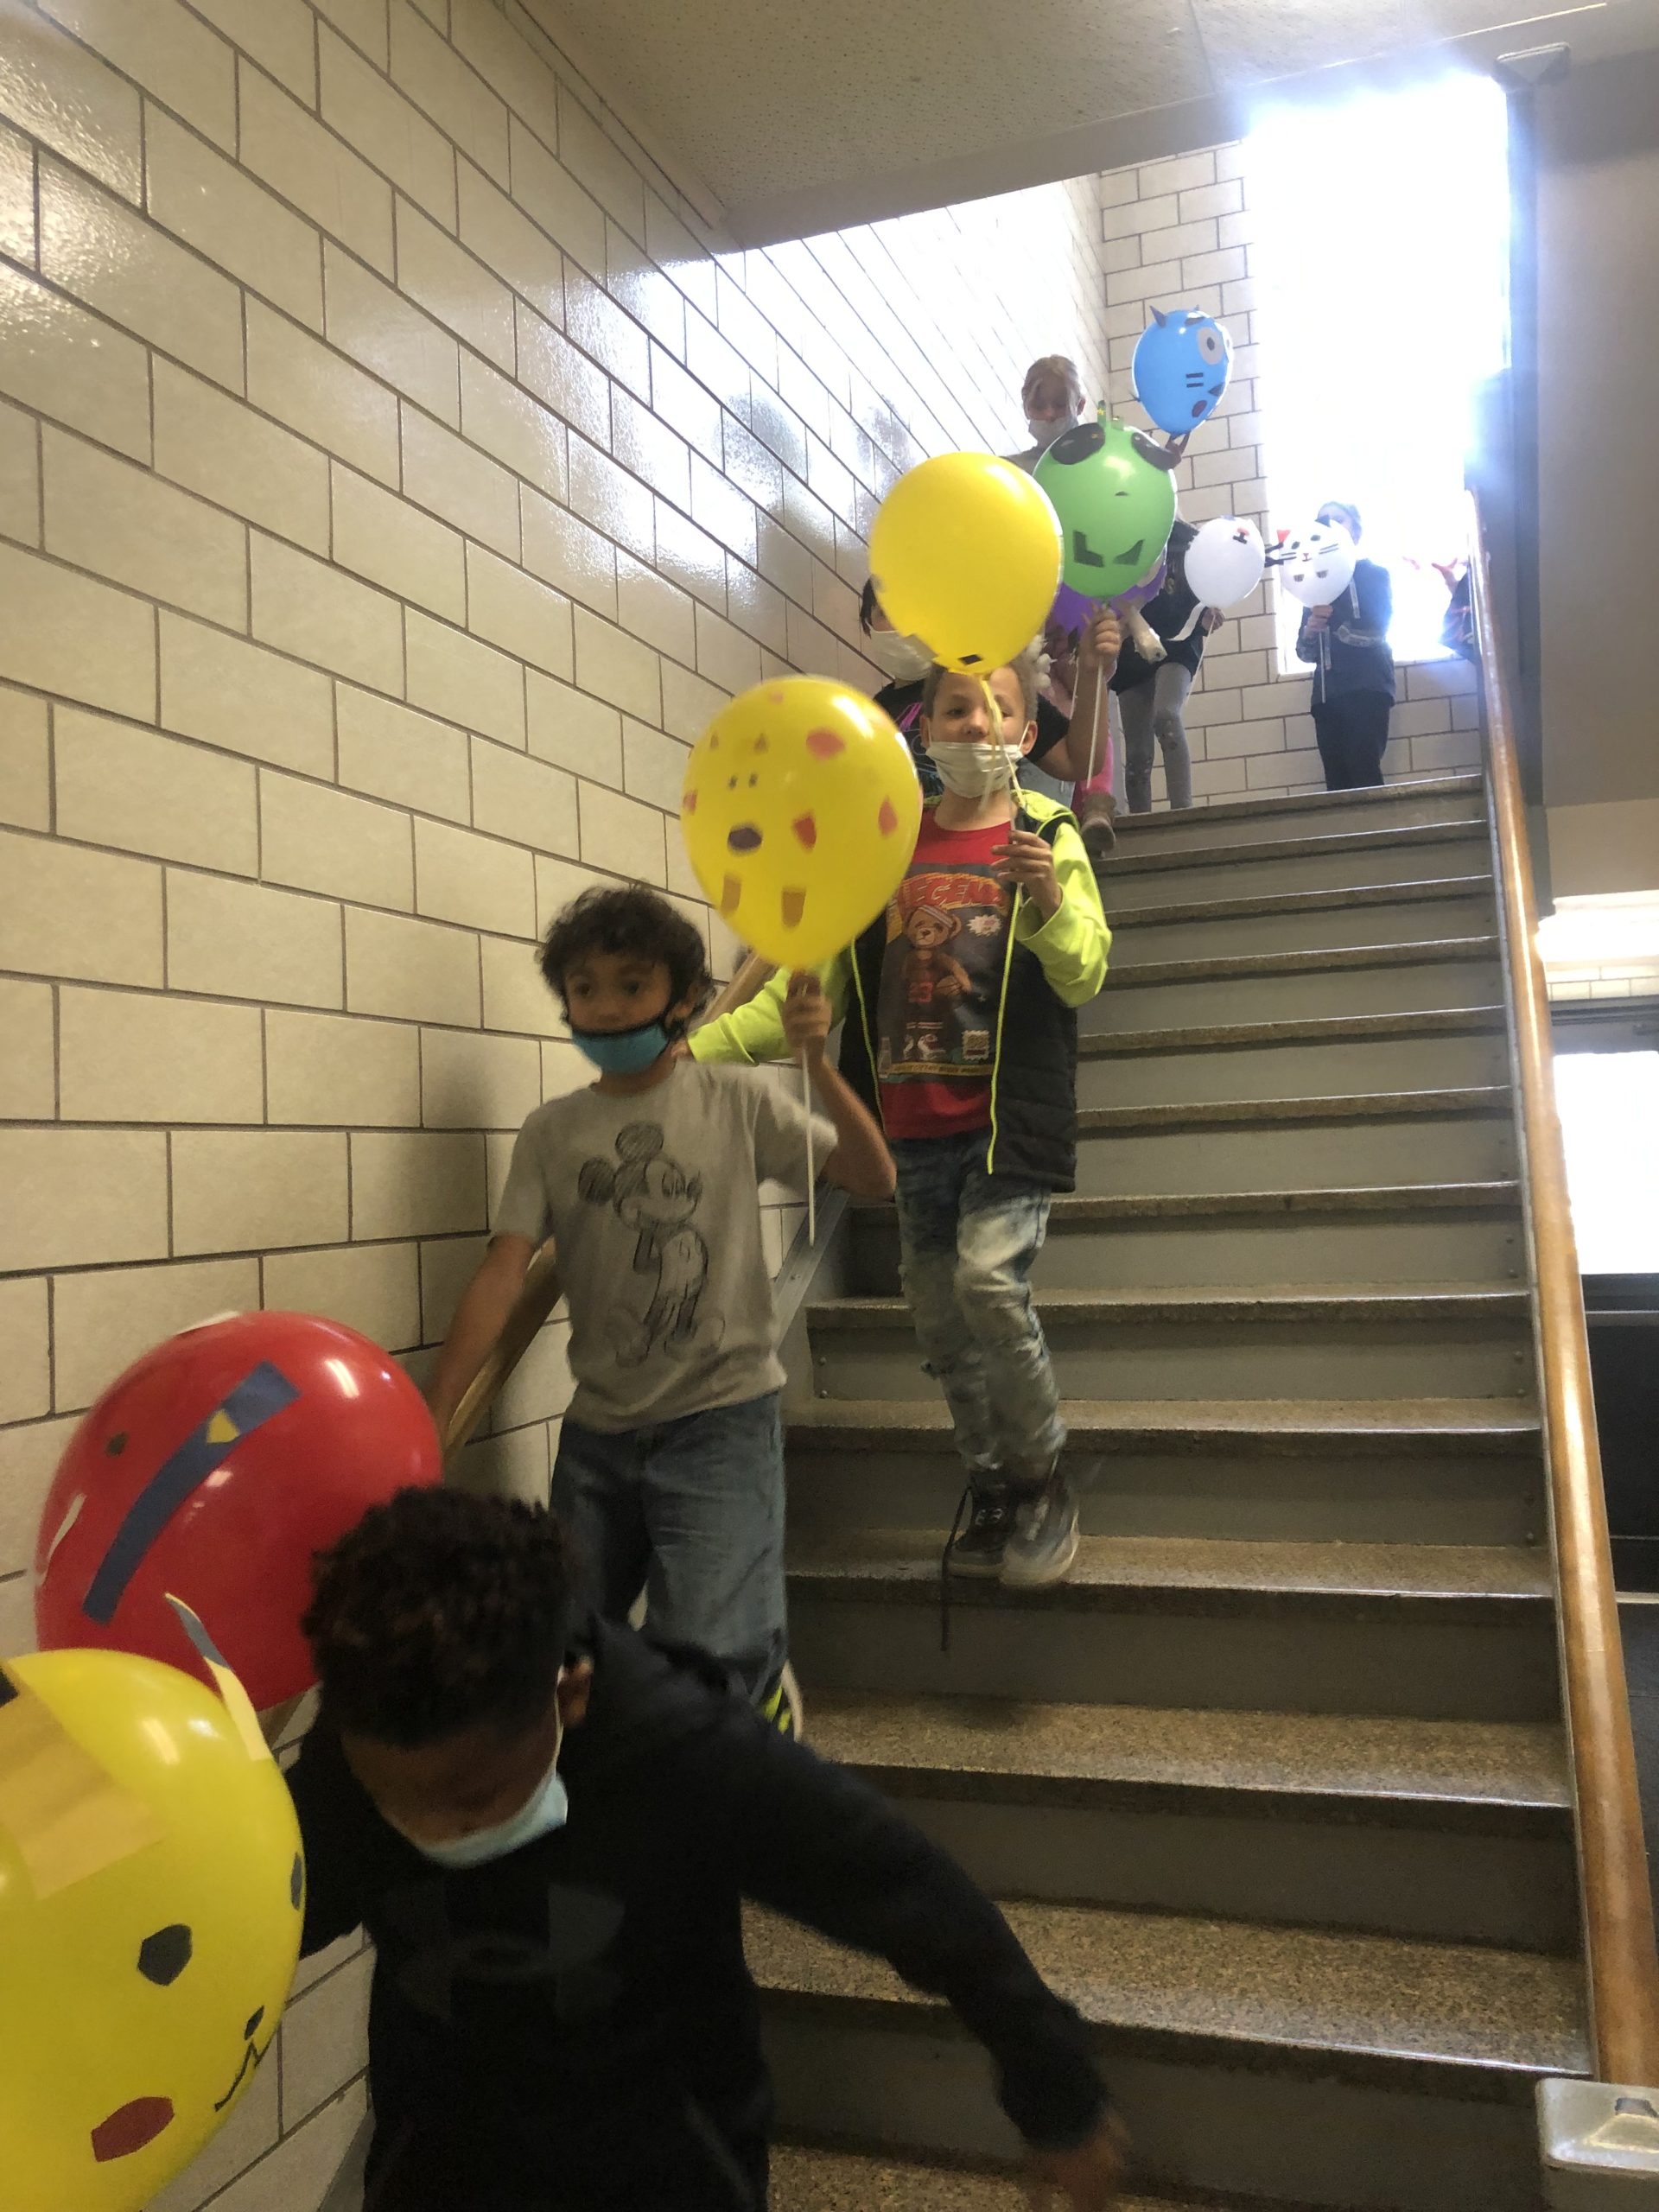 Fourth Graders Learn History of Macy’s Day Parade with a STEM Project